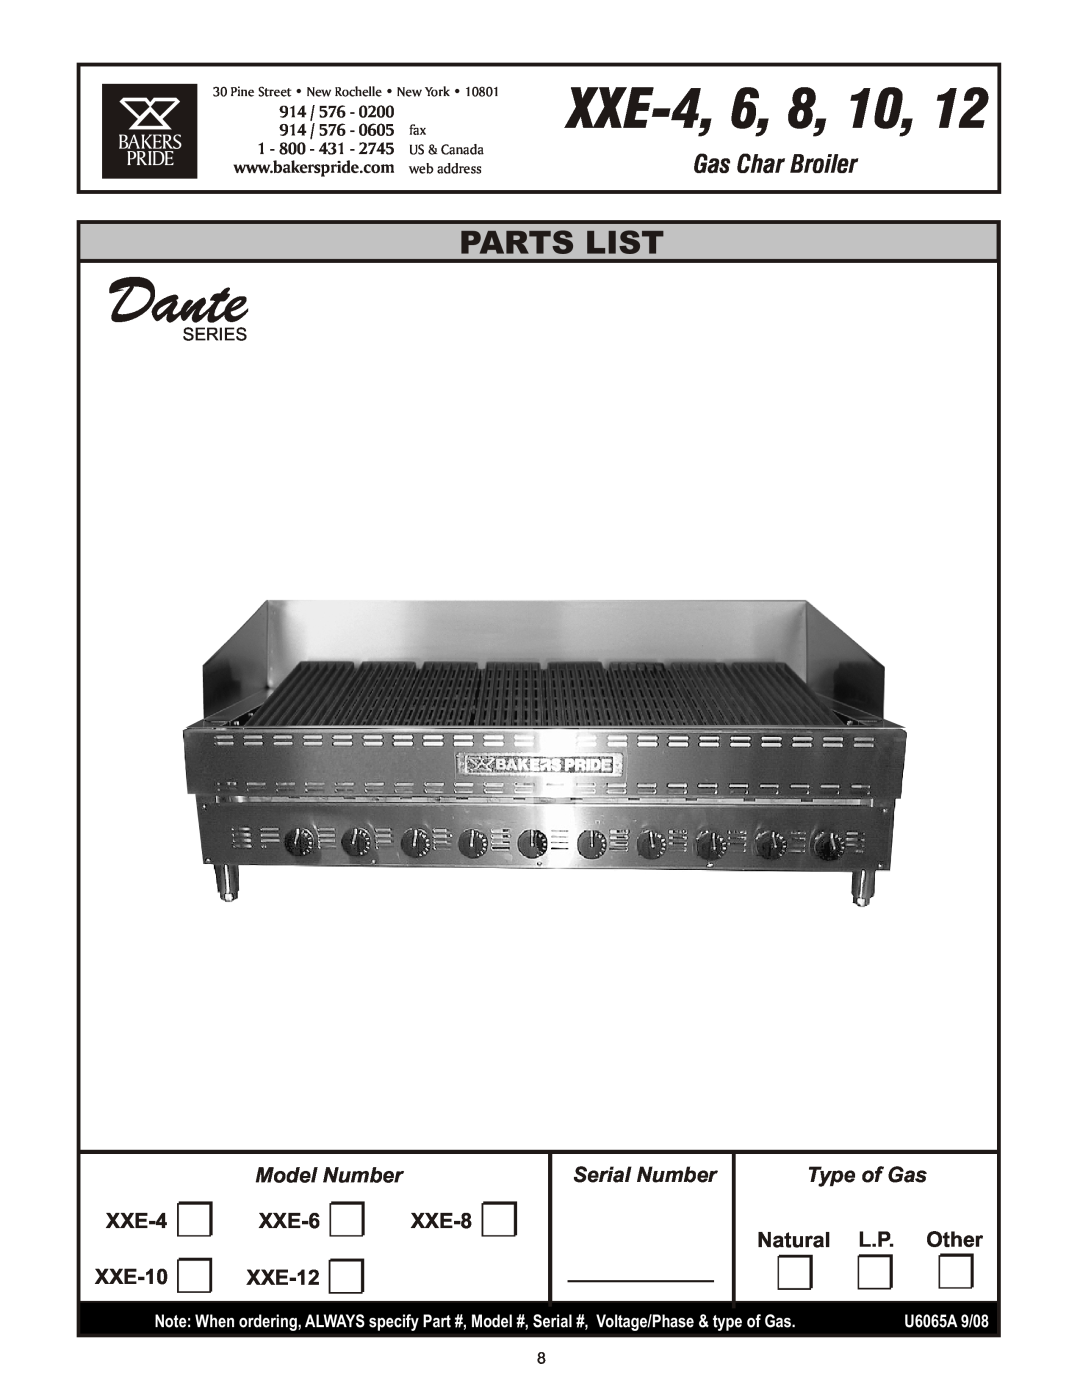 Bakers Pride Oven XXE-4,6, 8, Gas Char Broiler, Dante, Parts List, Model Number, XXE-6, XXE-8, XXE-10, Serial Number 